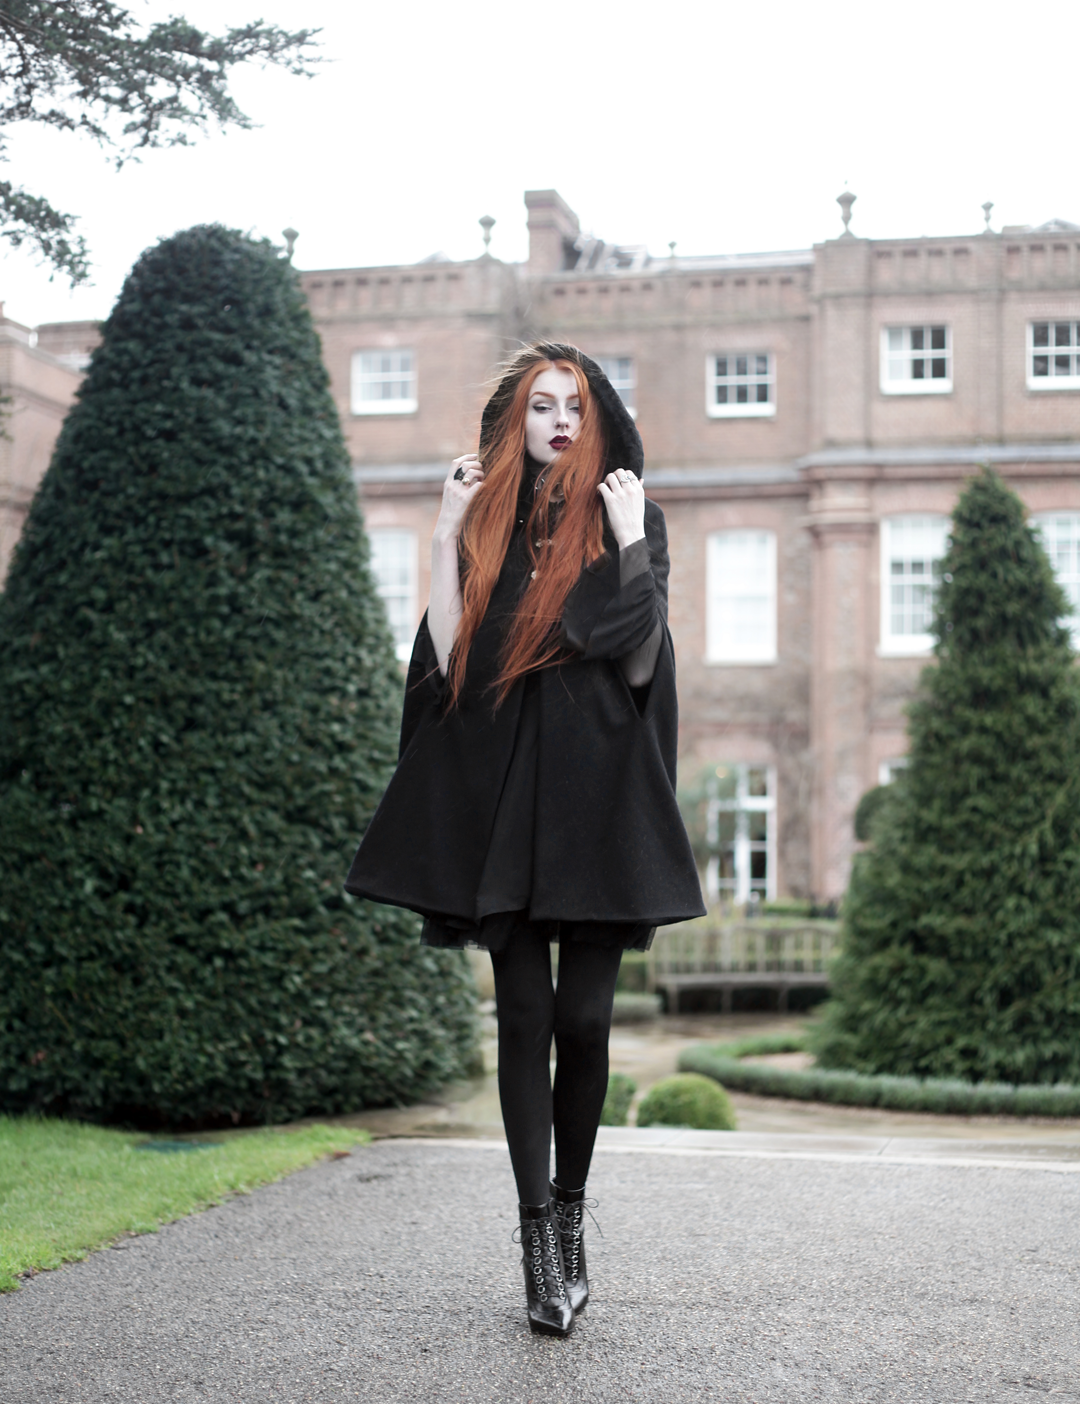 Olivia Emily wears Dark Thorn Clothing Cape, Killstar Nu Decay Dress, and Saint Laurent Fetish Ankle Boots